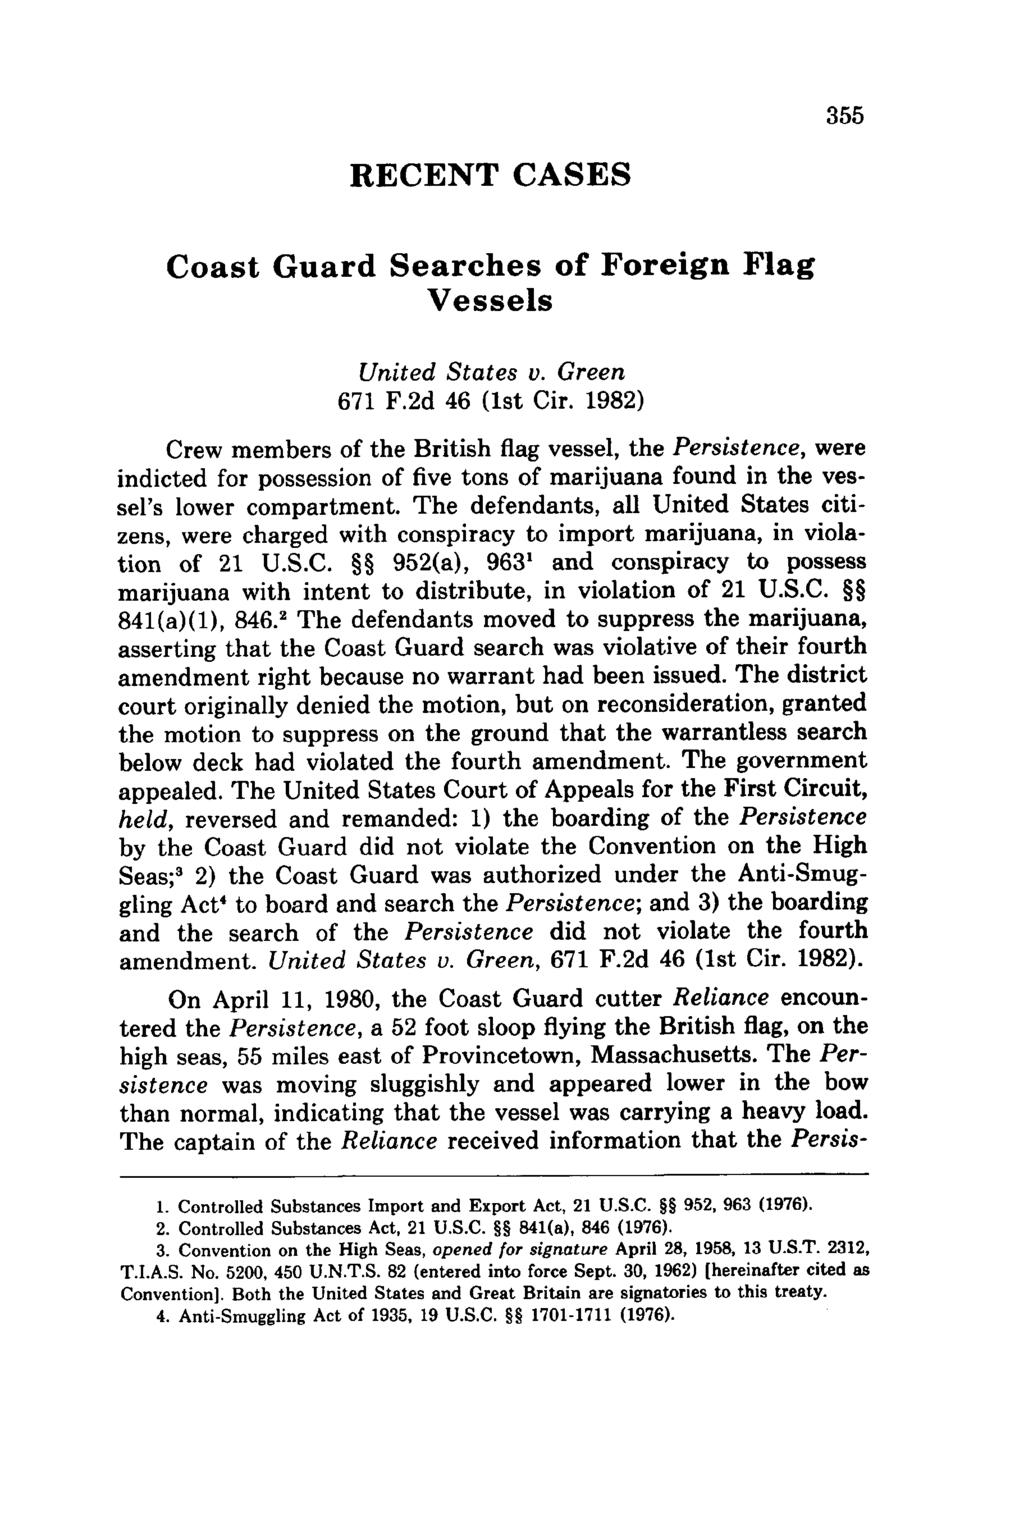 RECENT CASES Coast Guard Searches of Foreign Flag Vessels United States v. Green 671 F.2d 46 (1st Cir.